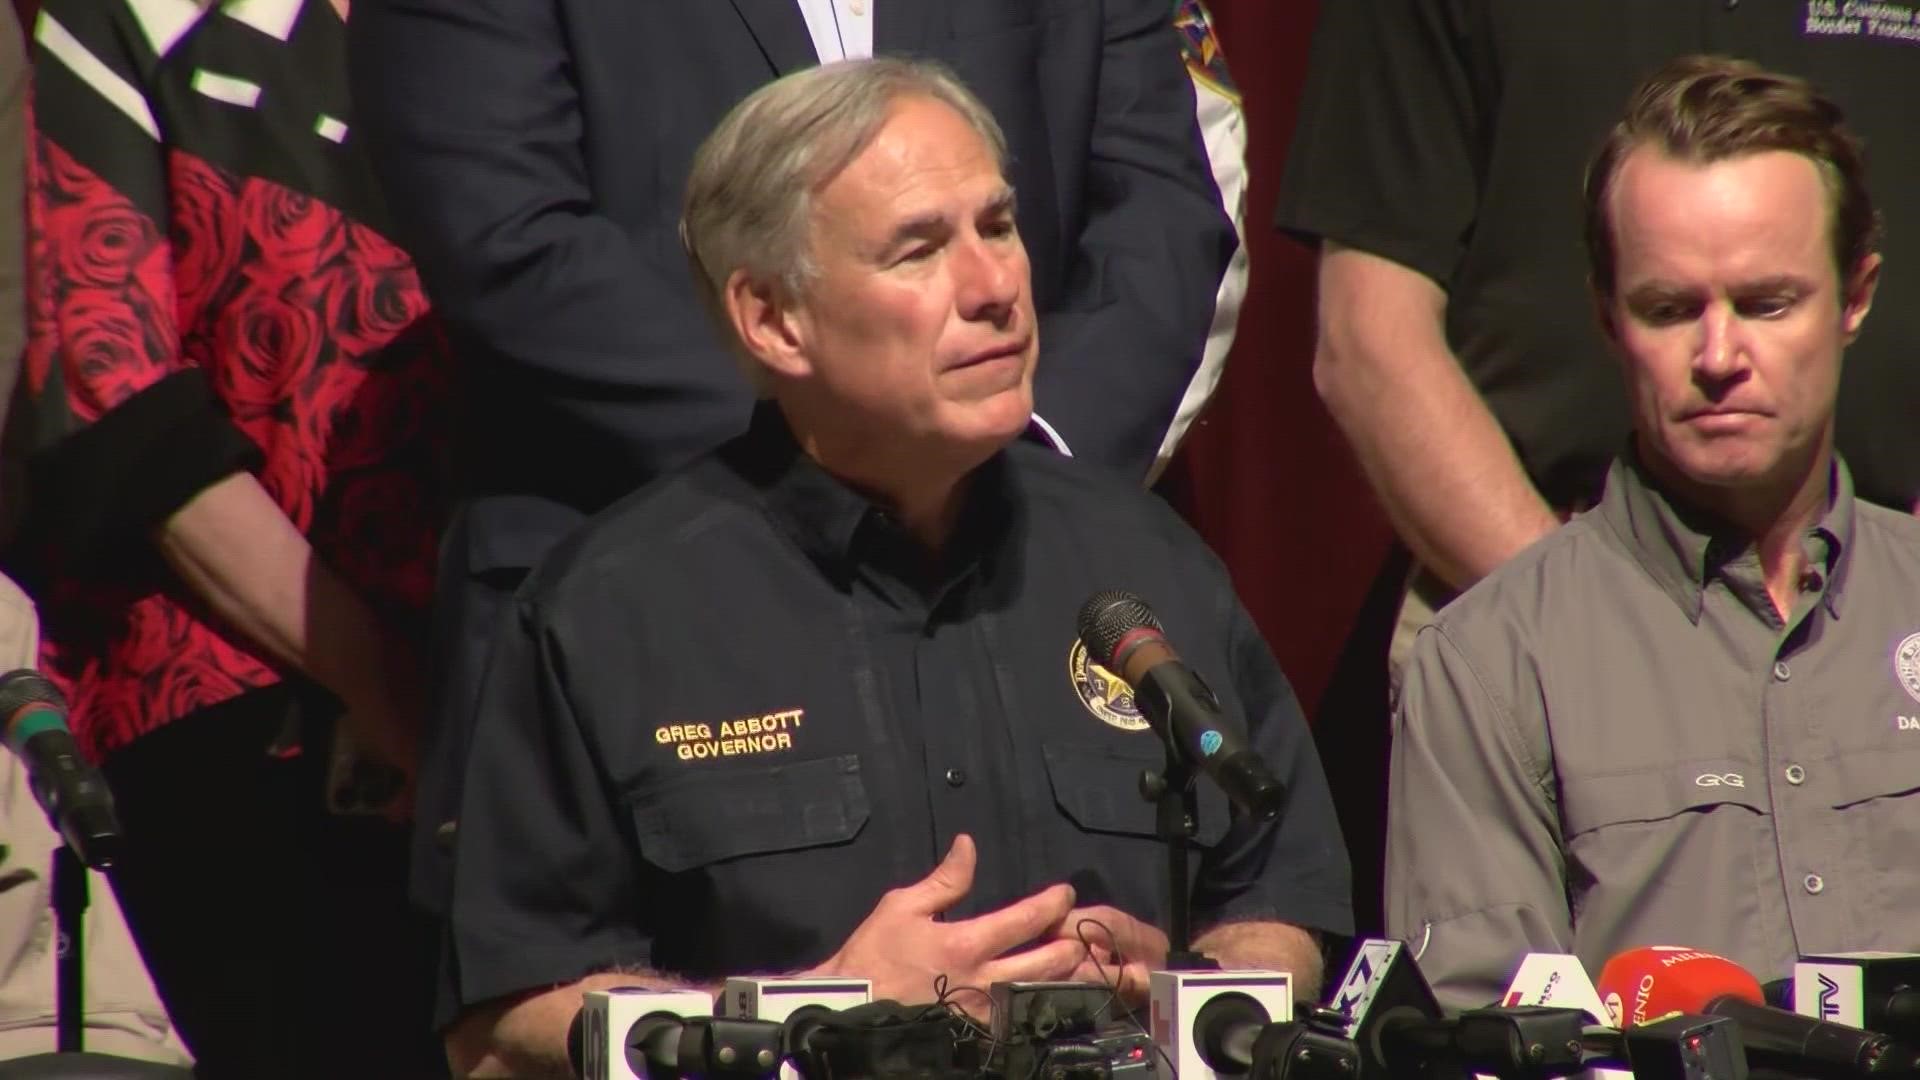 During his news conference, Gov. Abbott said anybody who shoots somebody has a mental health challenge, but statistics show that’s rarely the case.